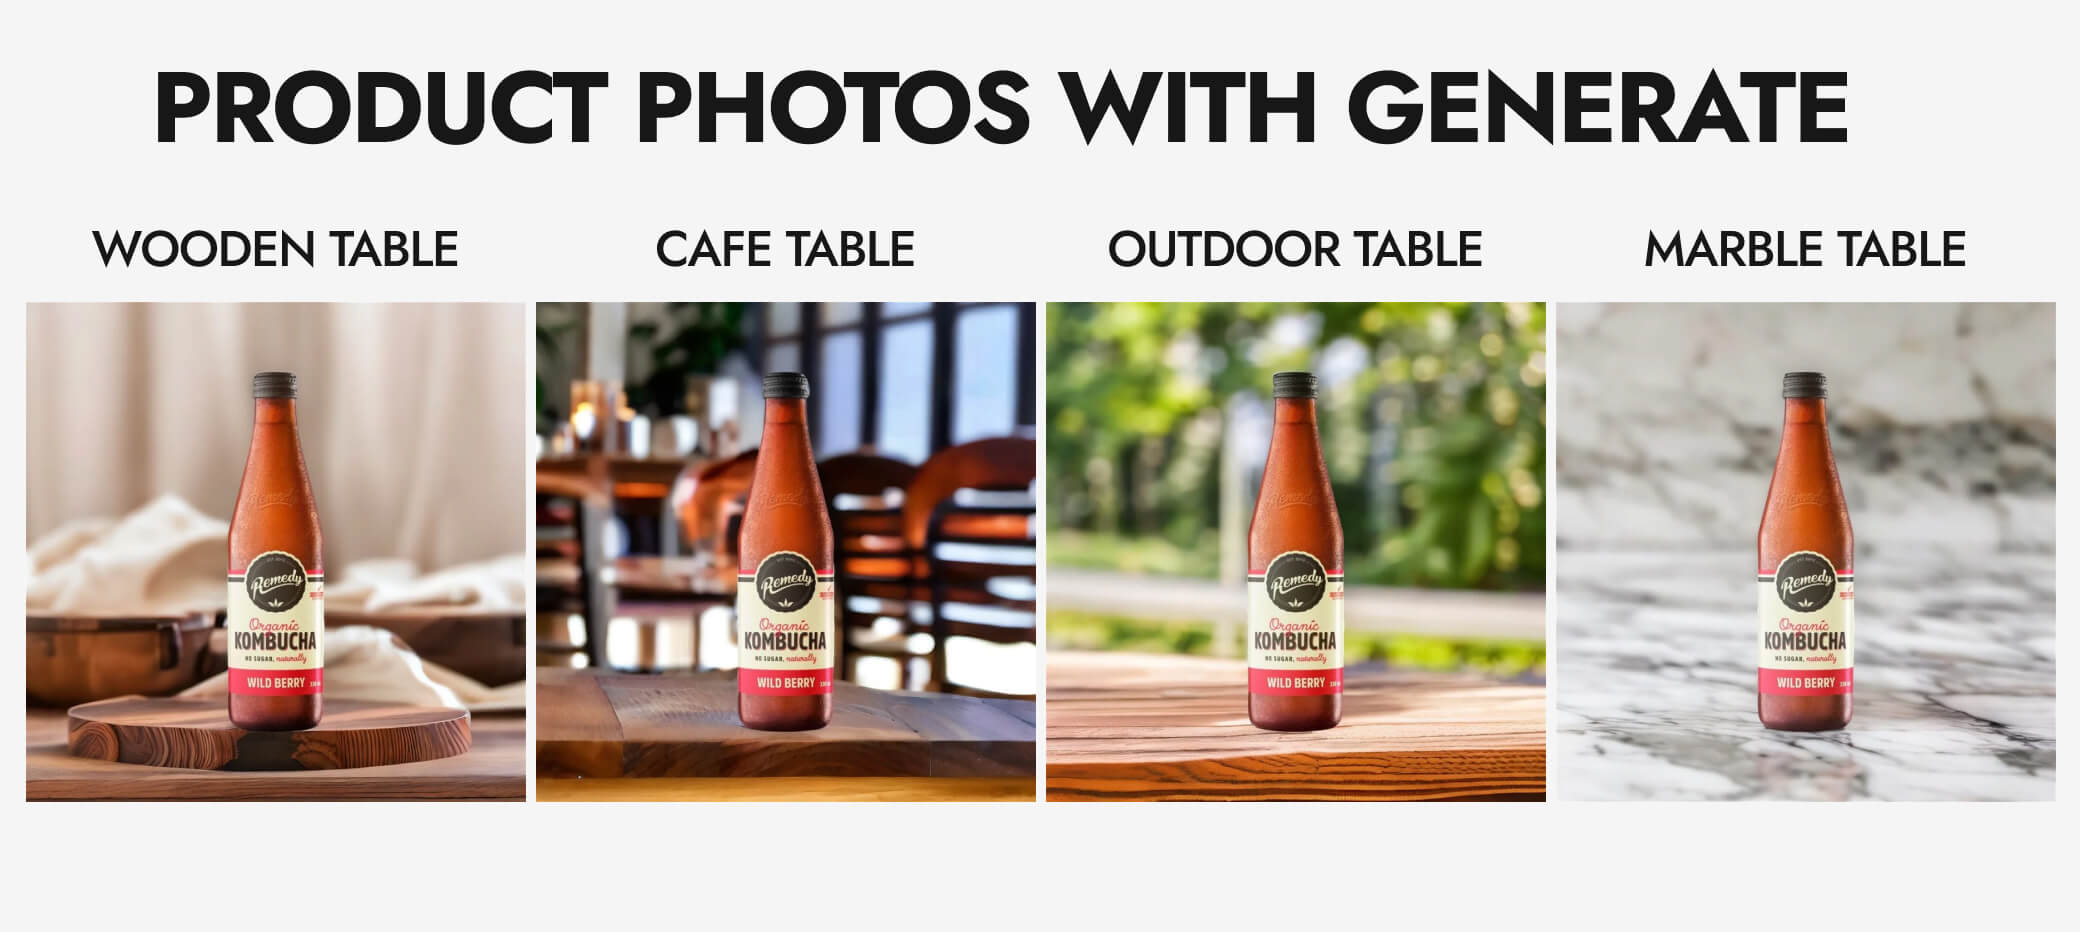 Kombucha product photos generated with GENERATE